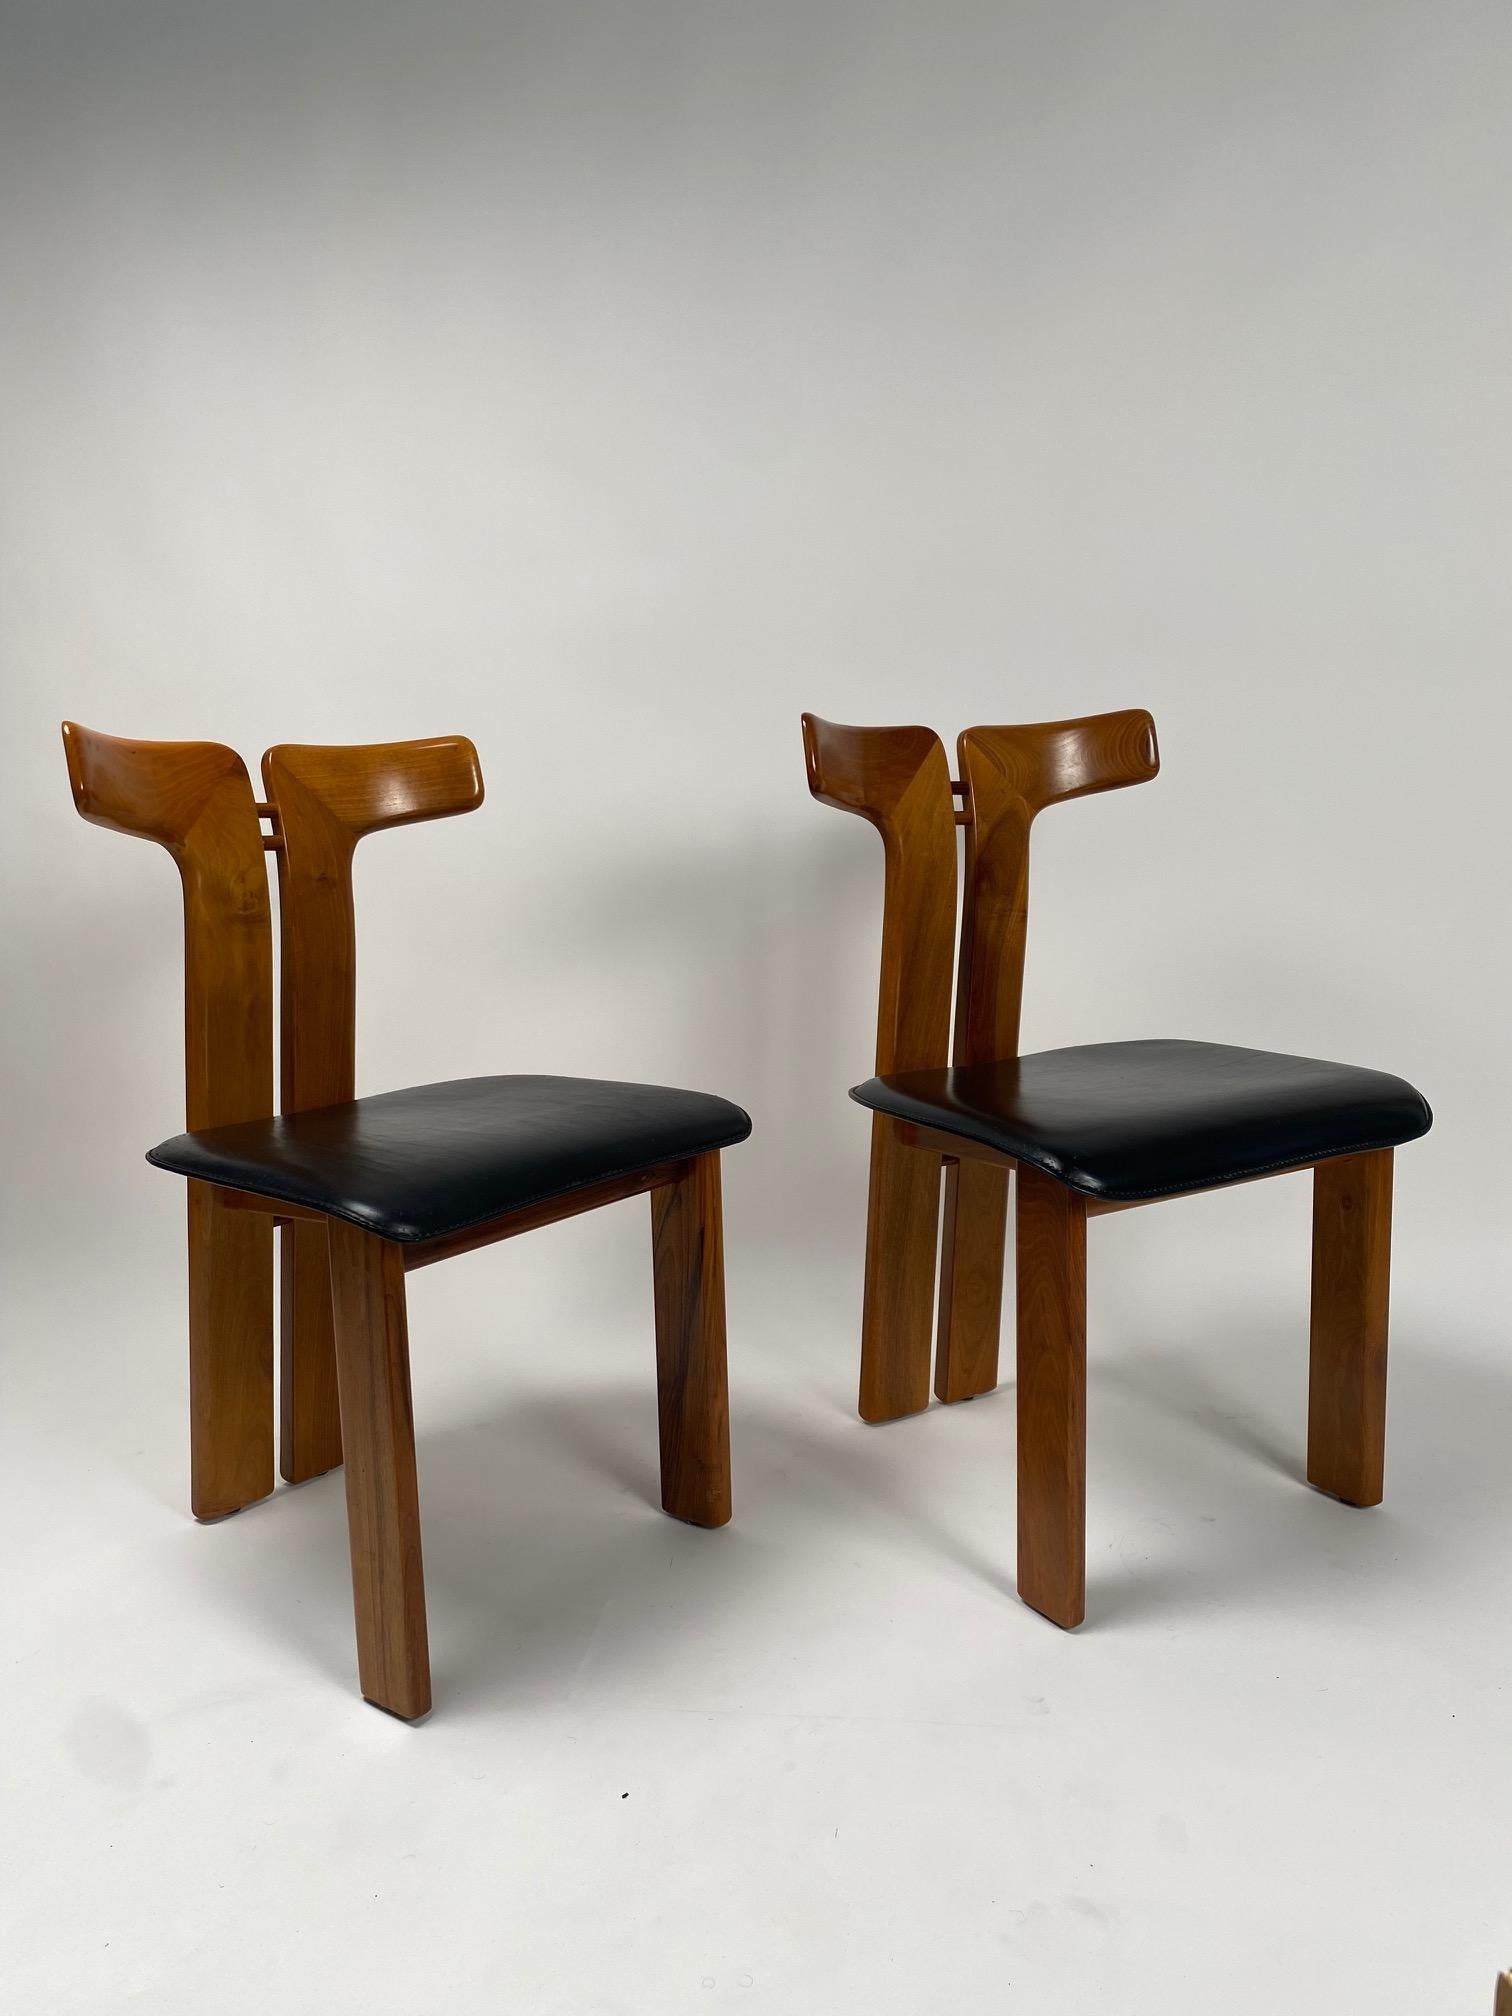 Pierre Cardin (1922-2020), Set of four dining chairs in walnut and leather, Italy, 1970s.

Four rare chairs made by the famous French designer Pierre Cardin in the 70s for an Italian company. It is a sculptural and refined model, which lends itself